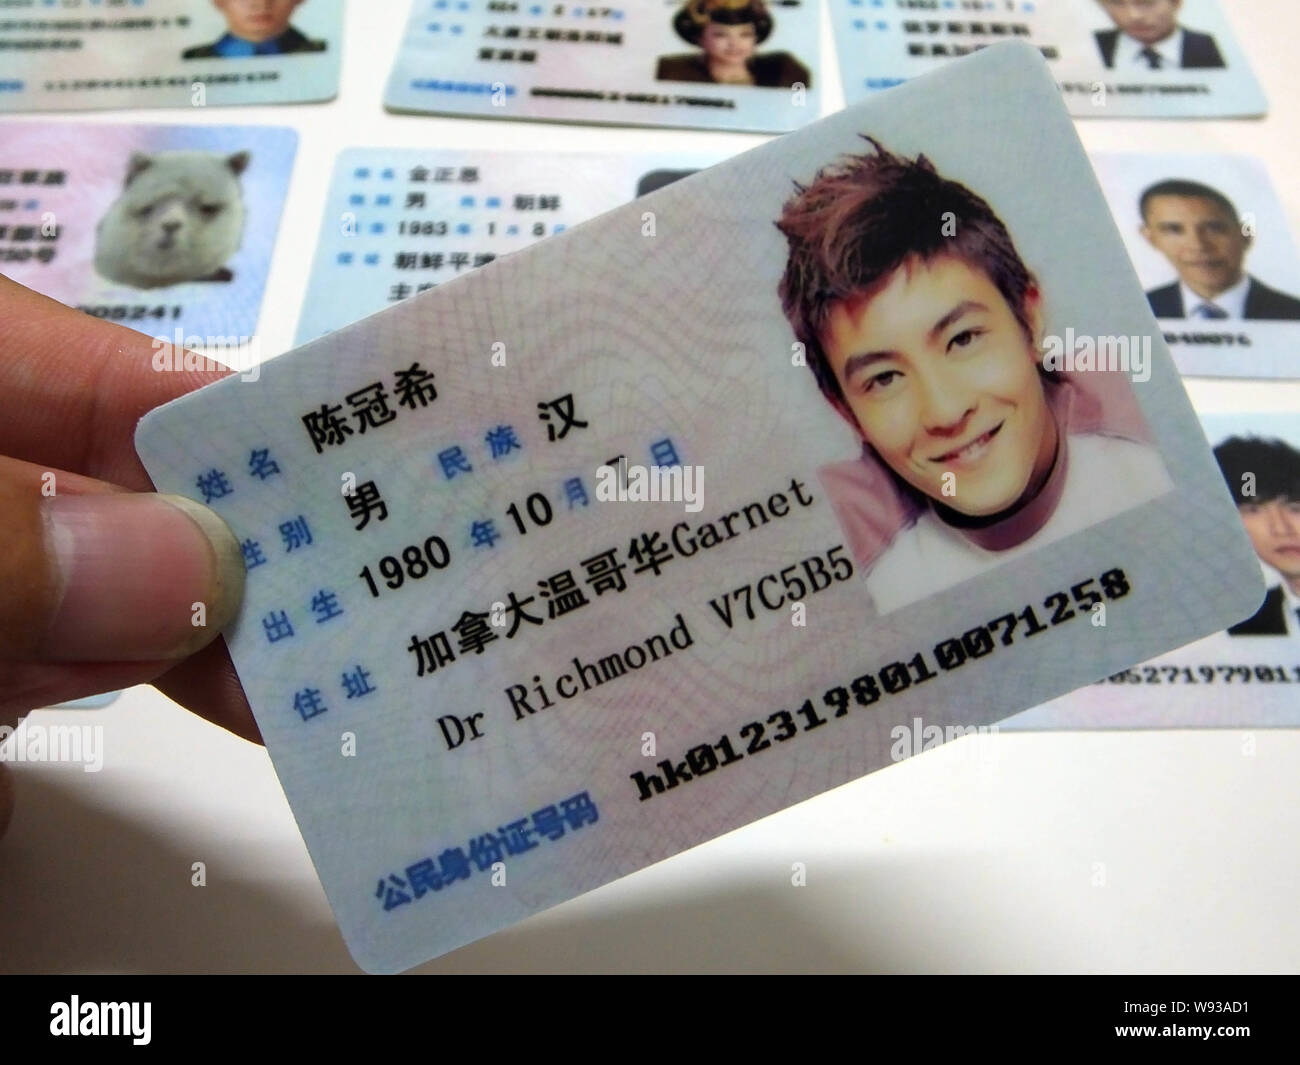 A man shows a fake Chinese ID card of Hong Kong singer and actor Edison Chen